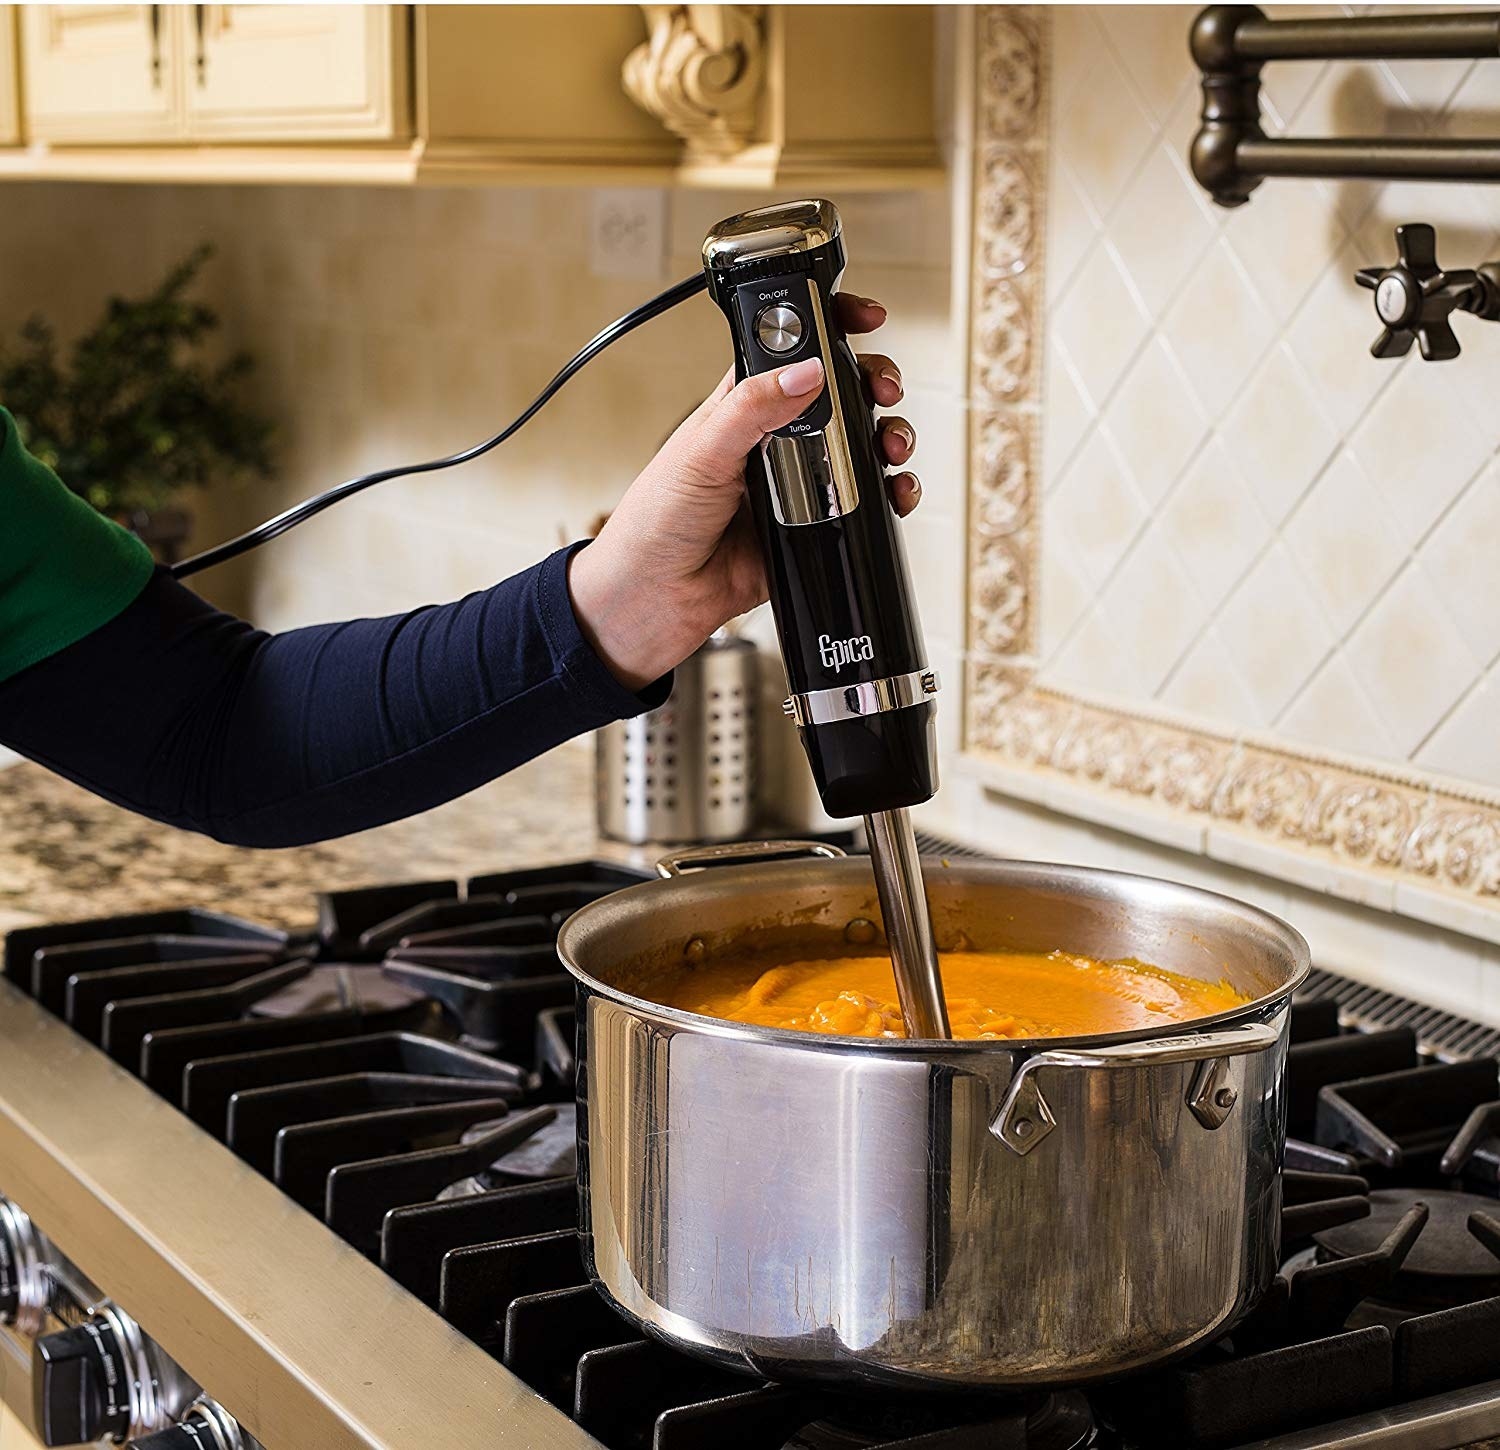 The 30 best kitchen gadgets of 2019: Instant Pot, KitchenAid and more